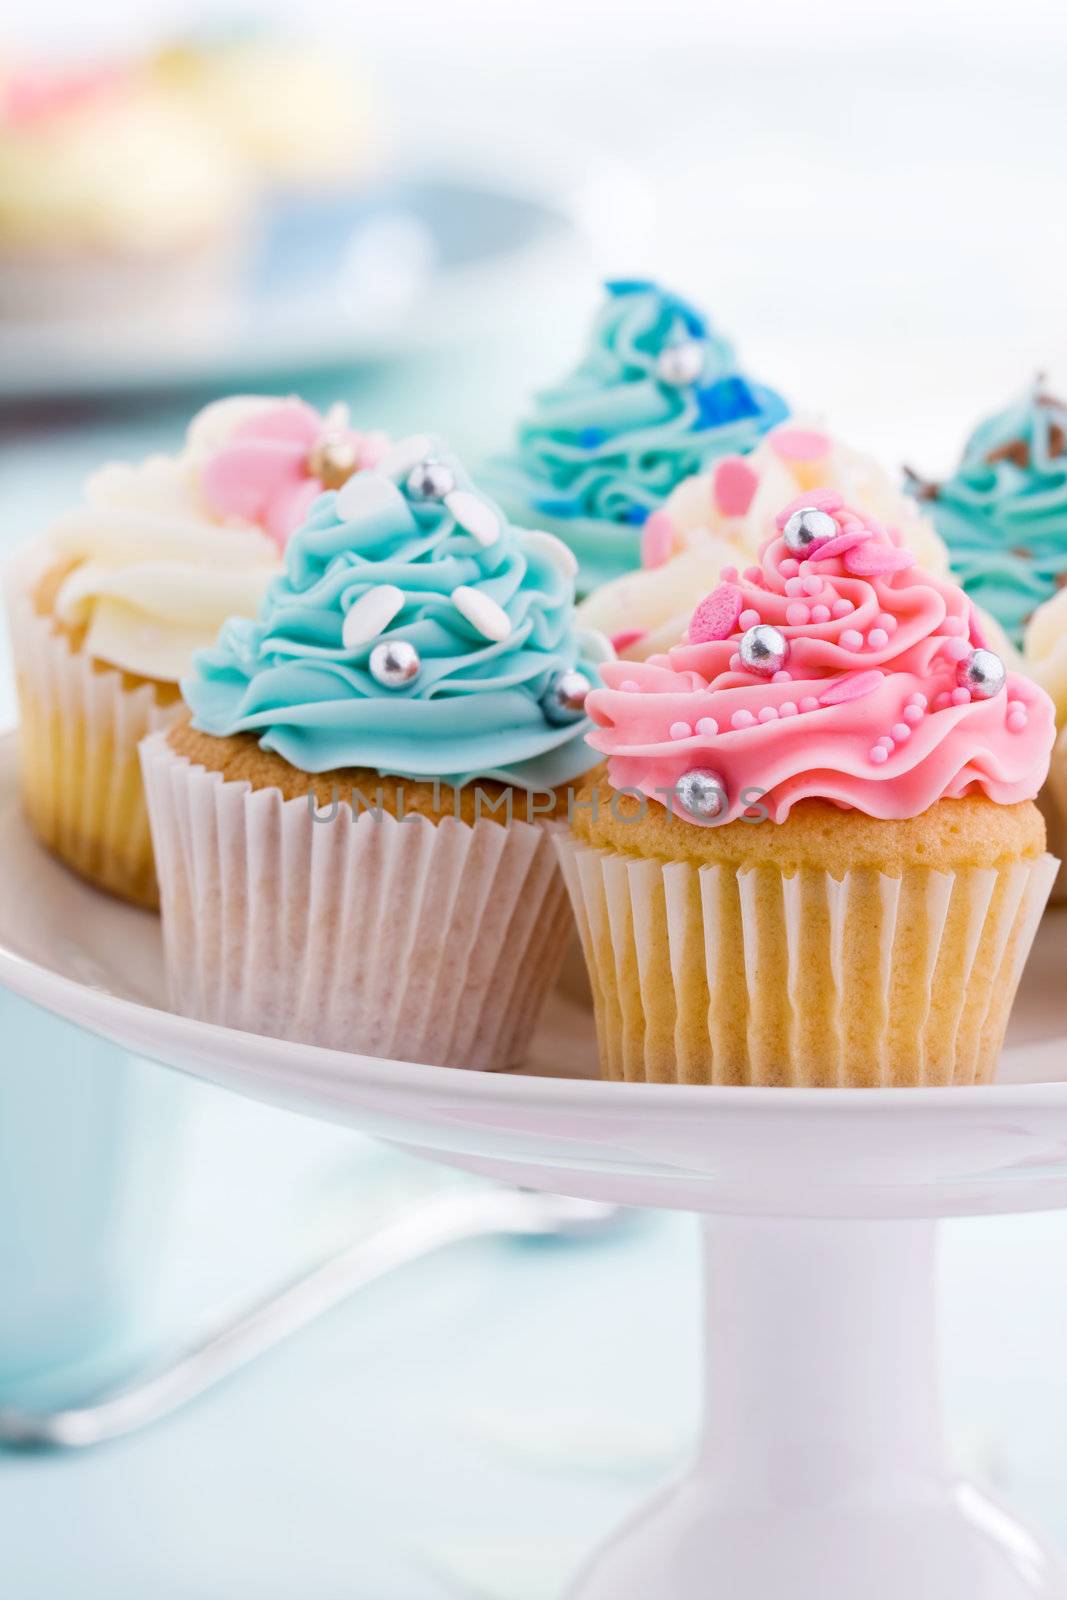 Assortment of colorful cupcakes on a cakestand